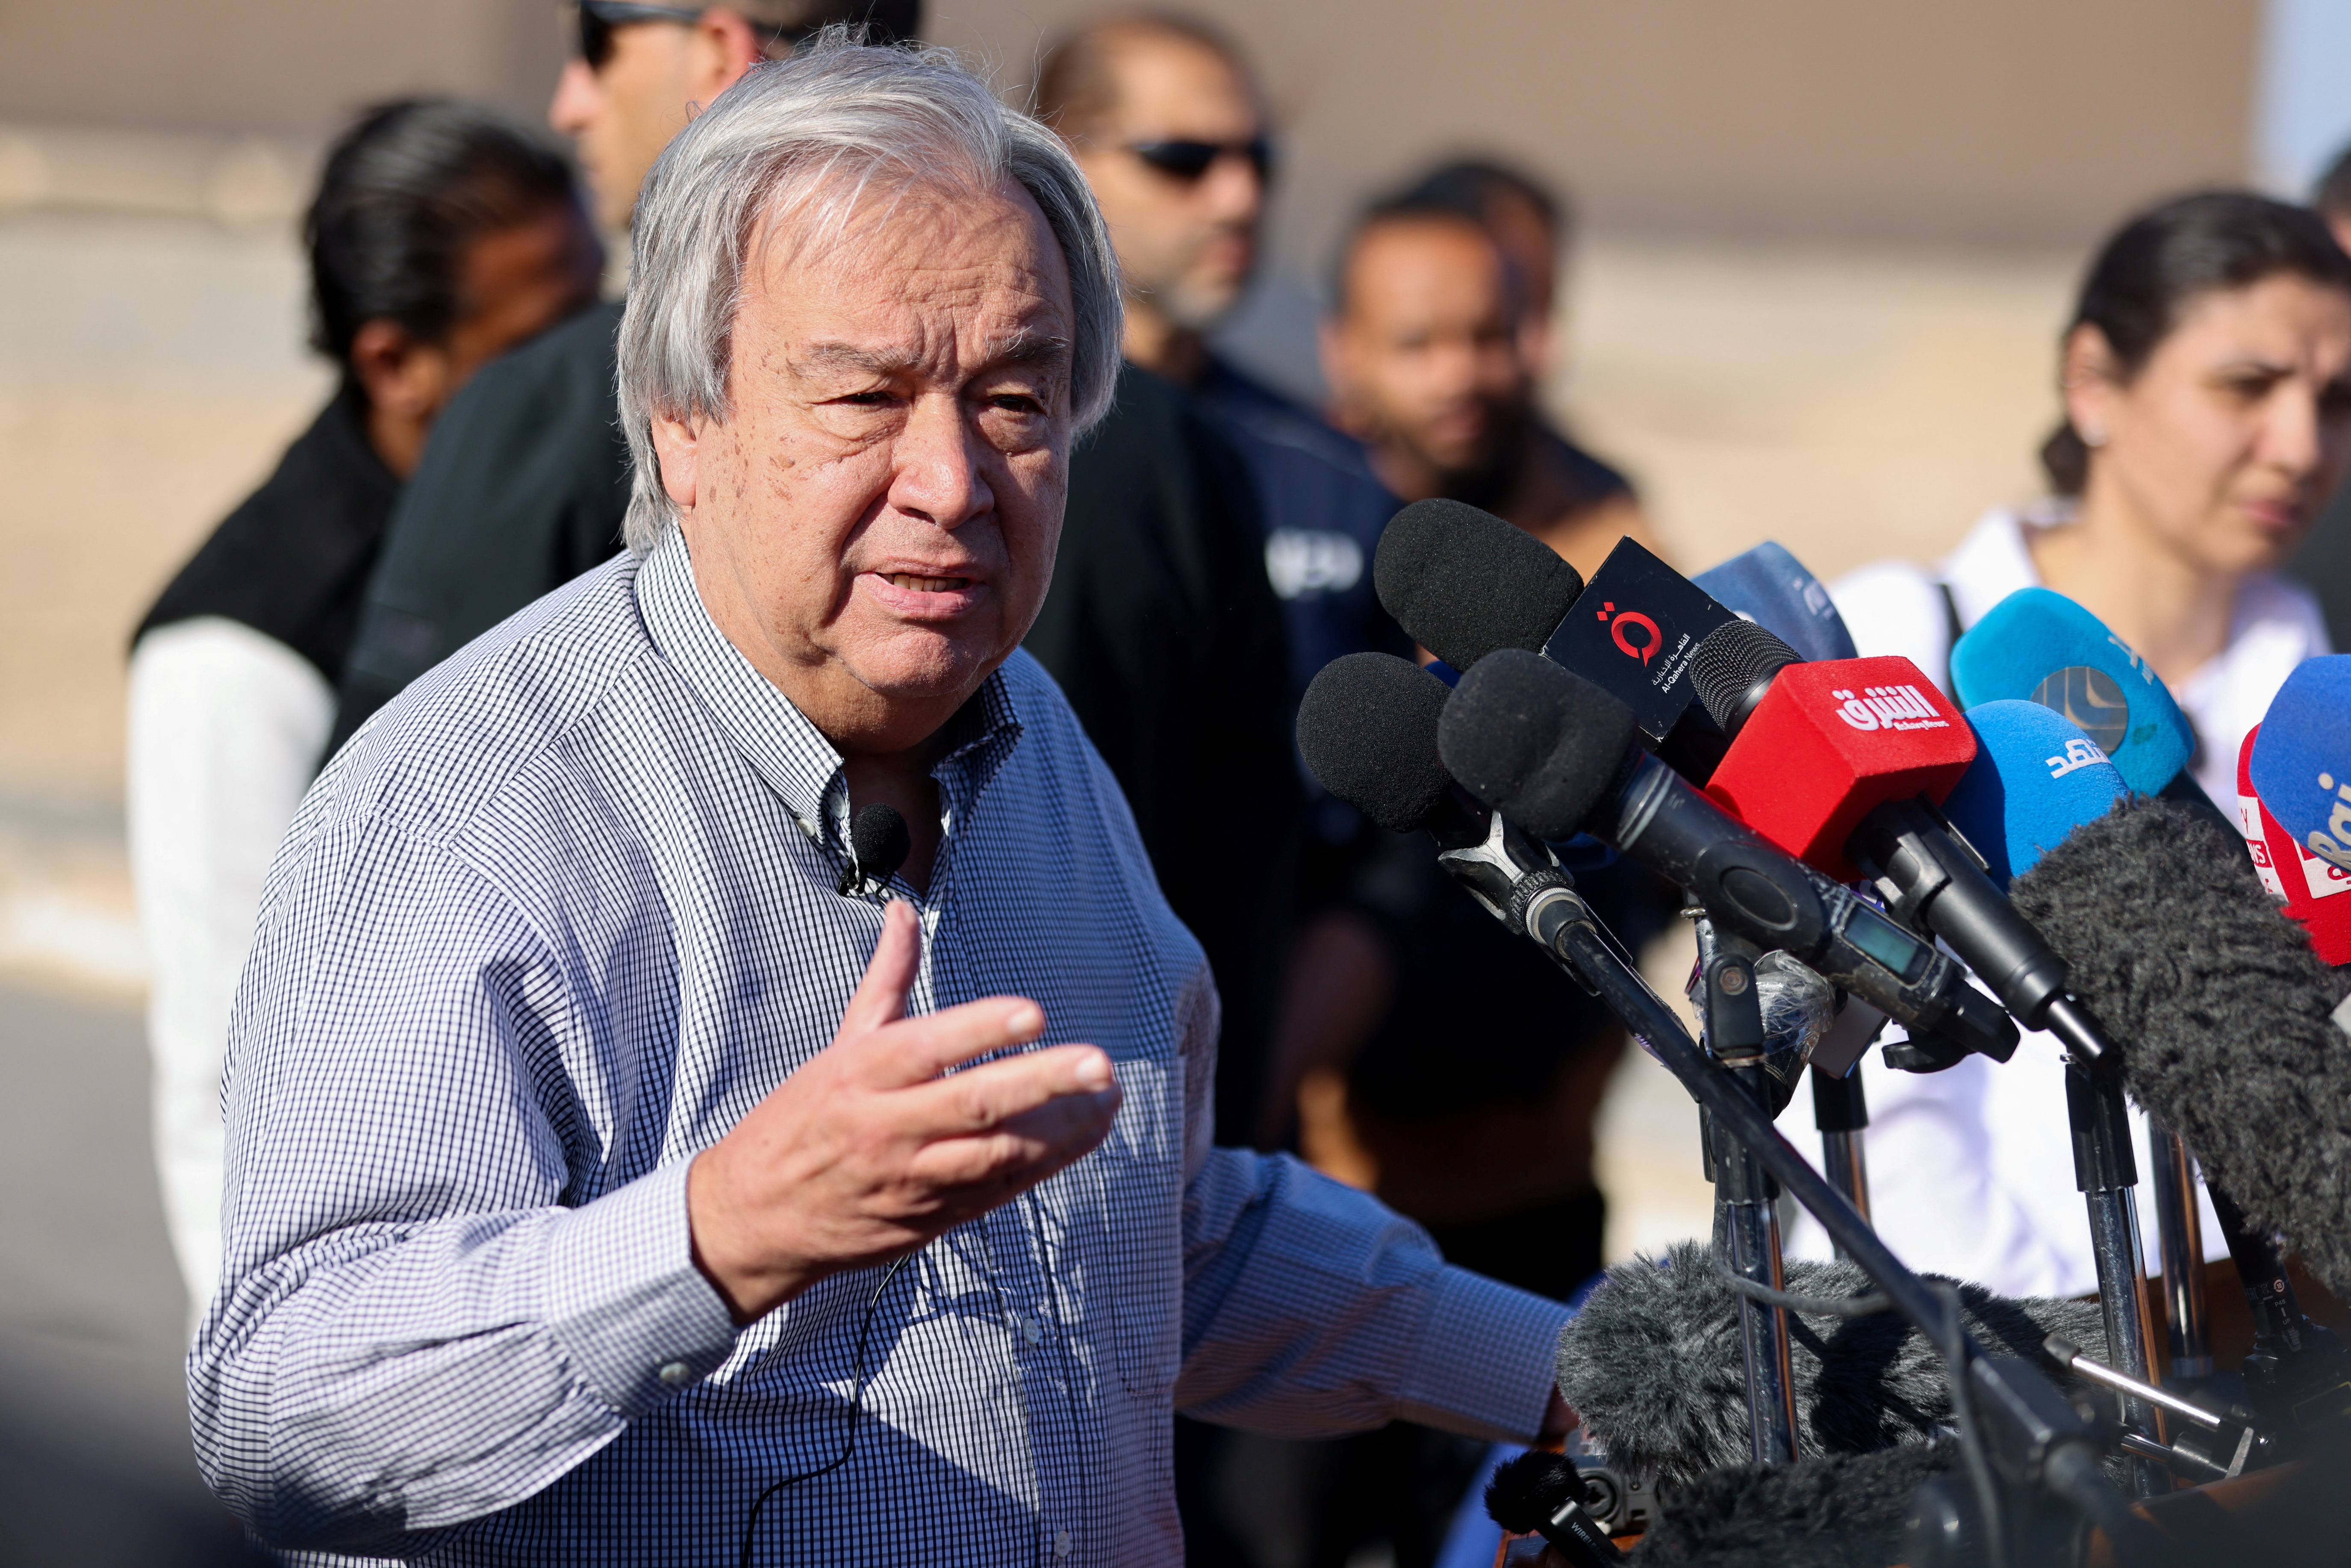 United Nations Secretary-General António Guterres speaks to the media at El Arish International Airport in Egypt on March 23.